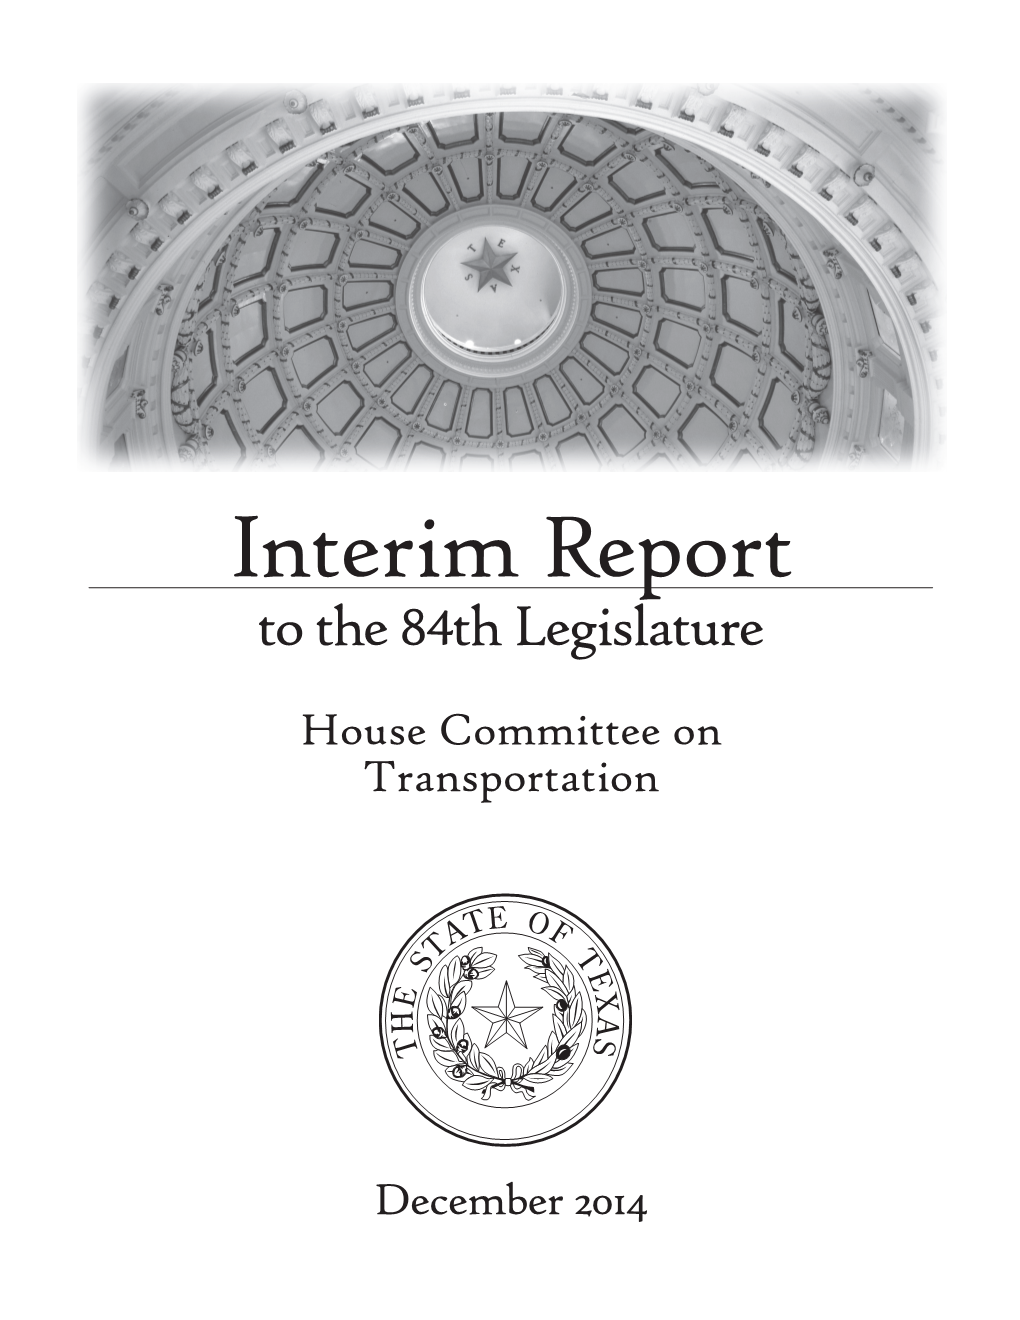 December 2014 HOUSE COMMITTEE on TRANSPORTATION TEXAS HOUSE of REPRESENTATIVES INTERIM REPORT 2014